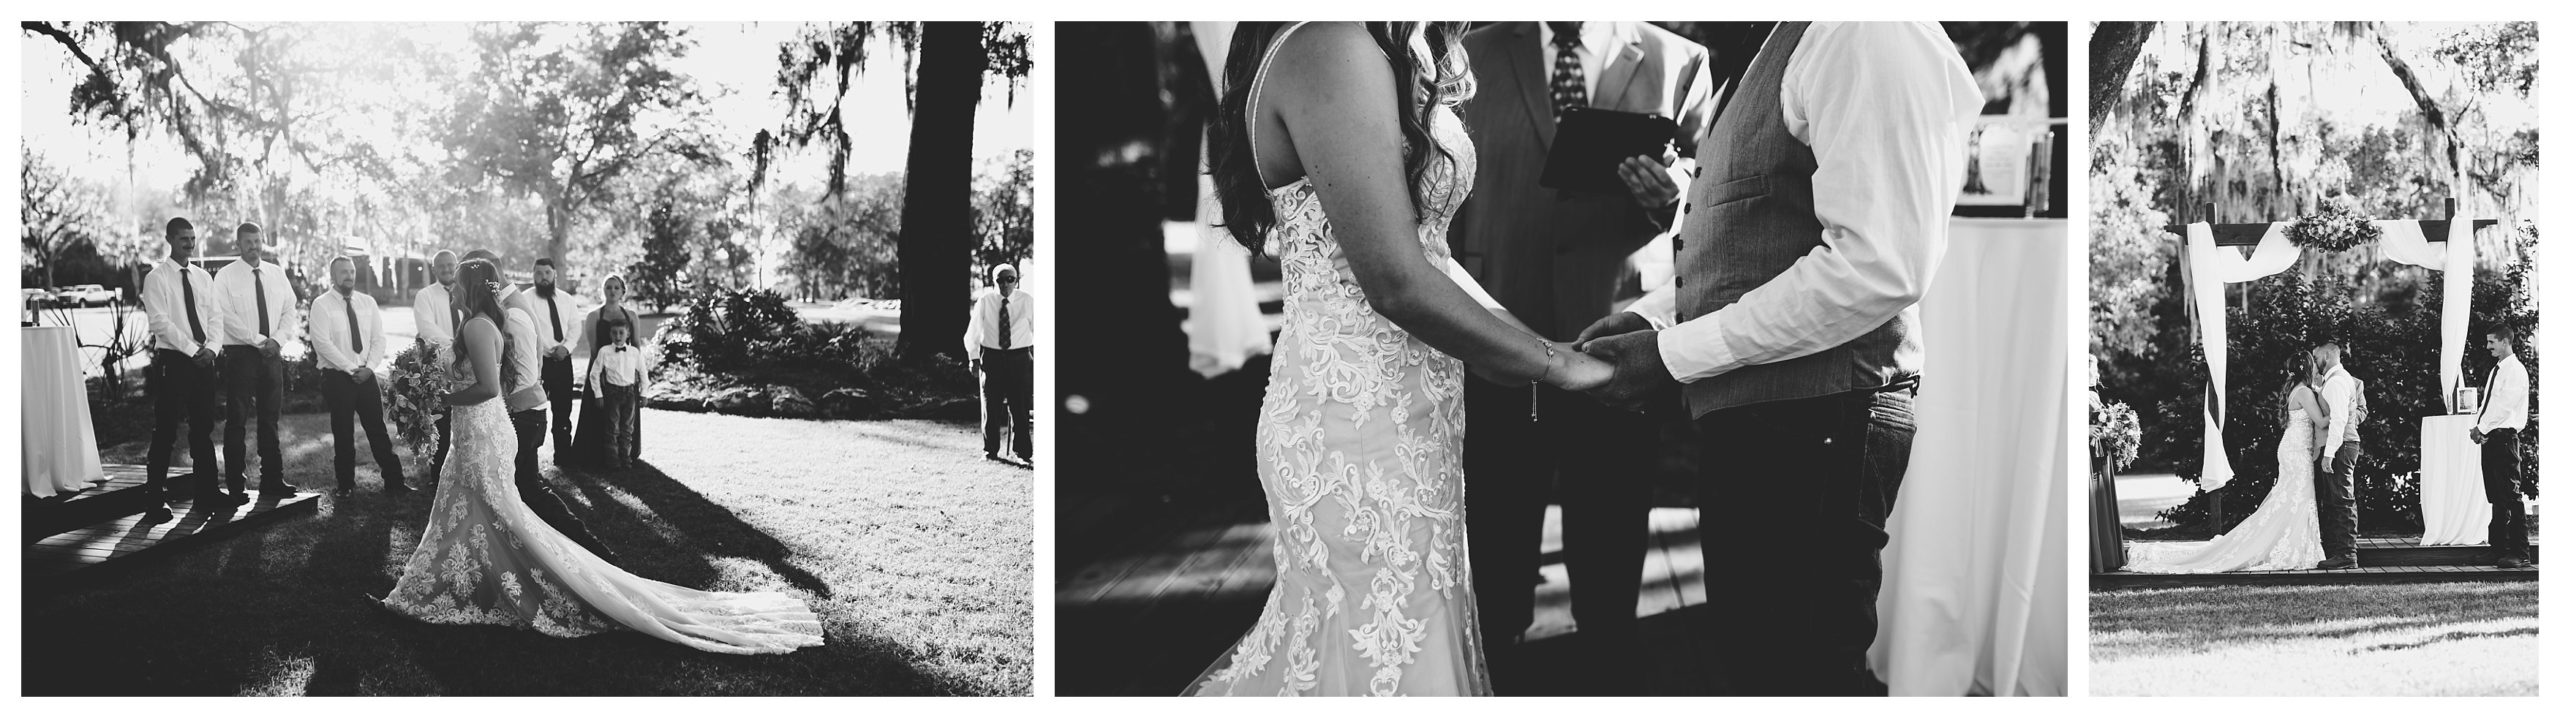 Photos taken during the ceremony at a Clark Plantation wedding.